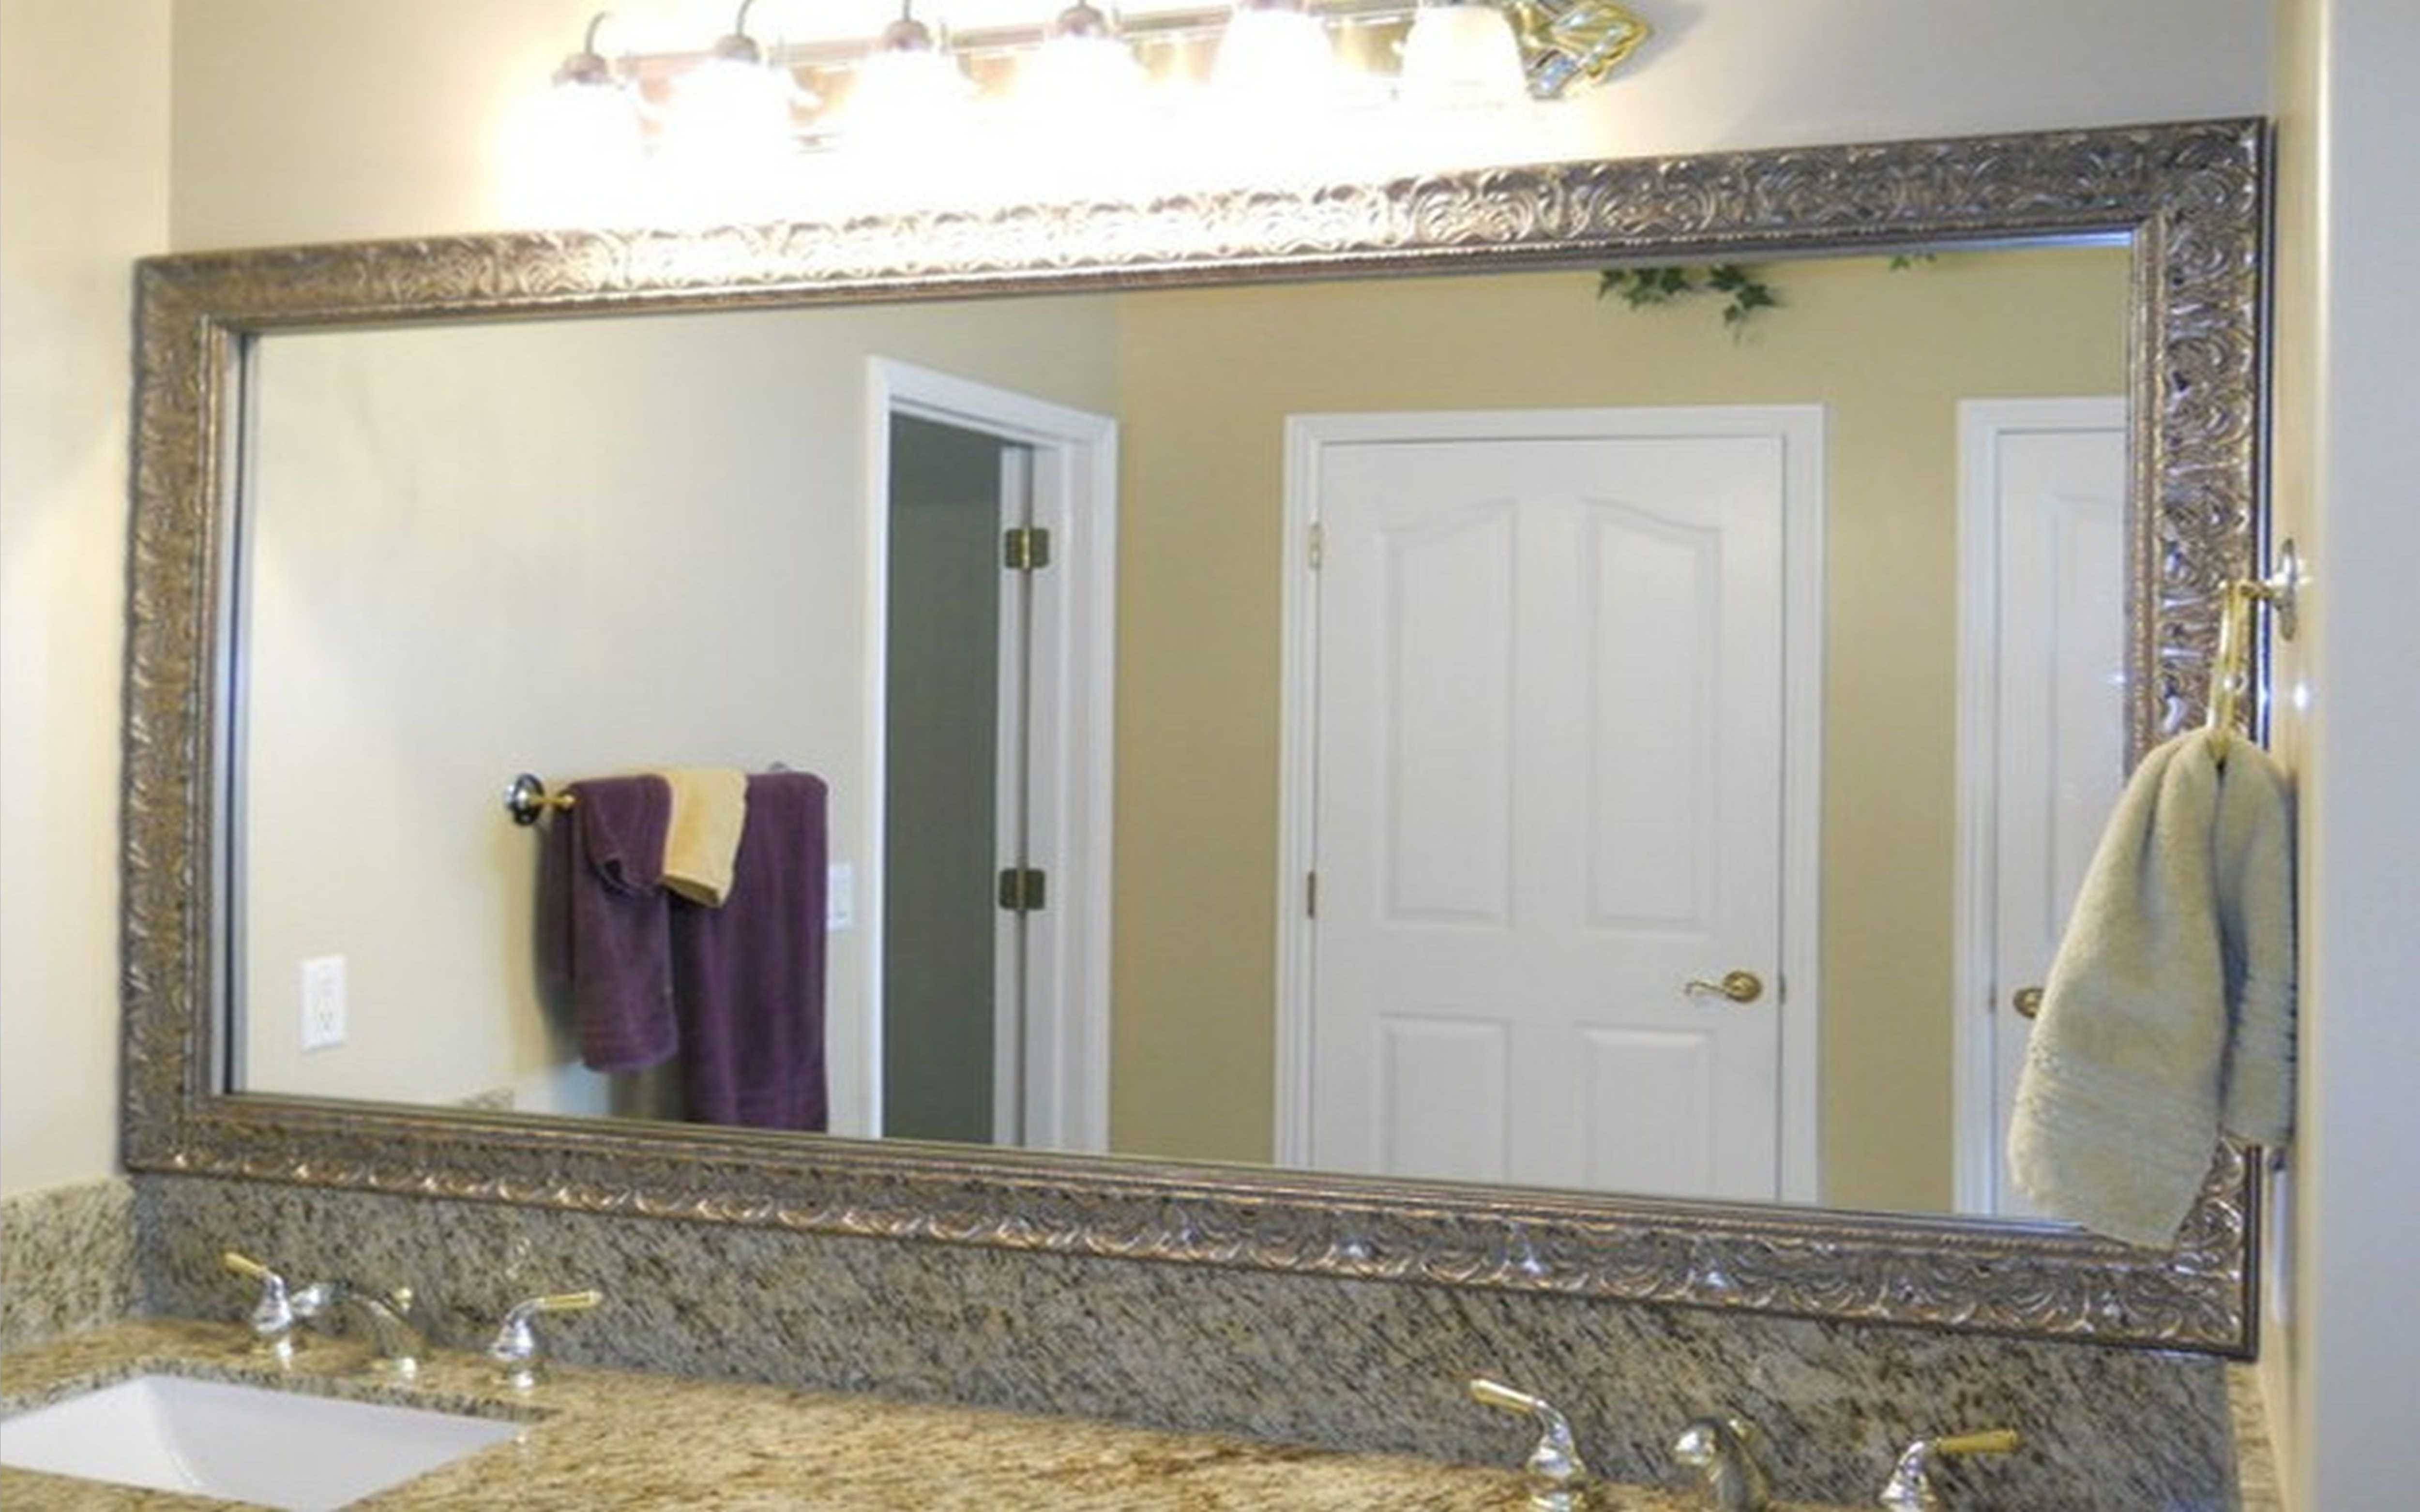 Large Frameless Bathroom Mirror 2017 Including Elegant Decor With Throughout Long Antique Mirrors (View 5 of 15)